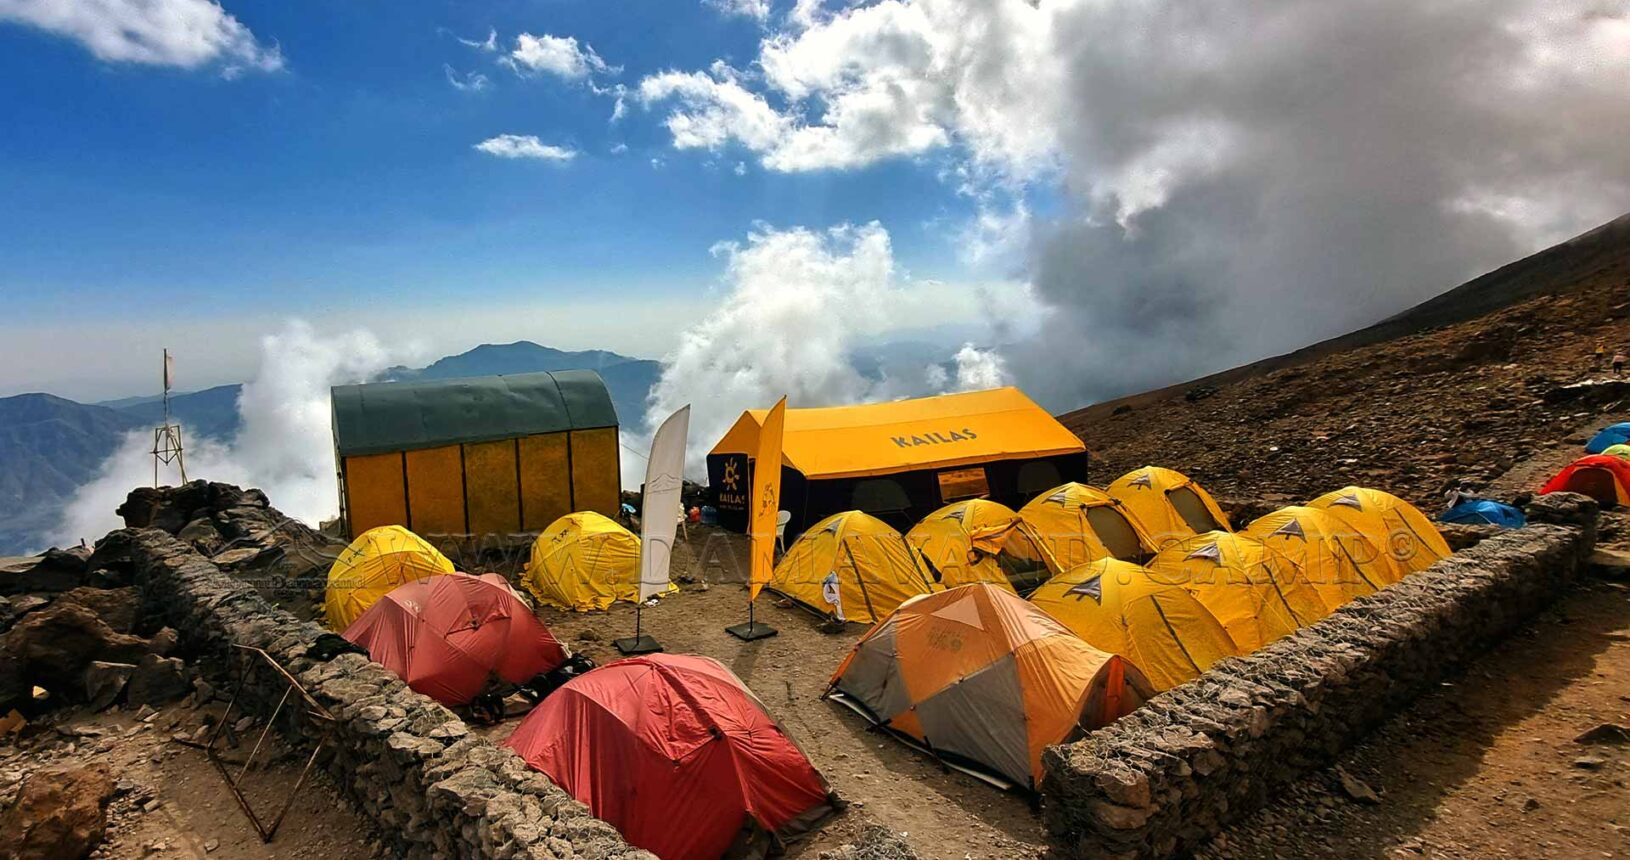 Tents organized and maintained by the Mount Damavand Group at Camp 3